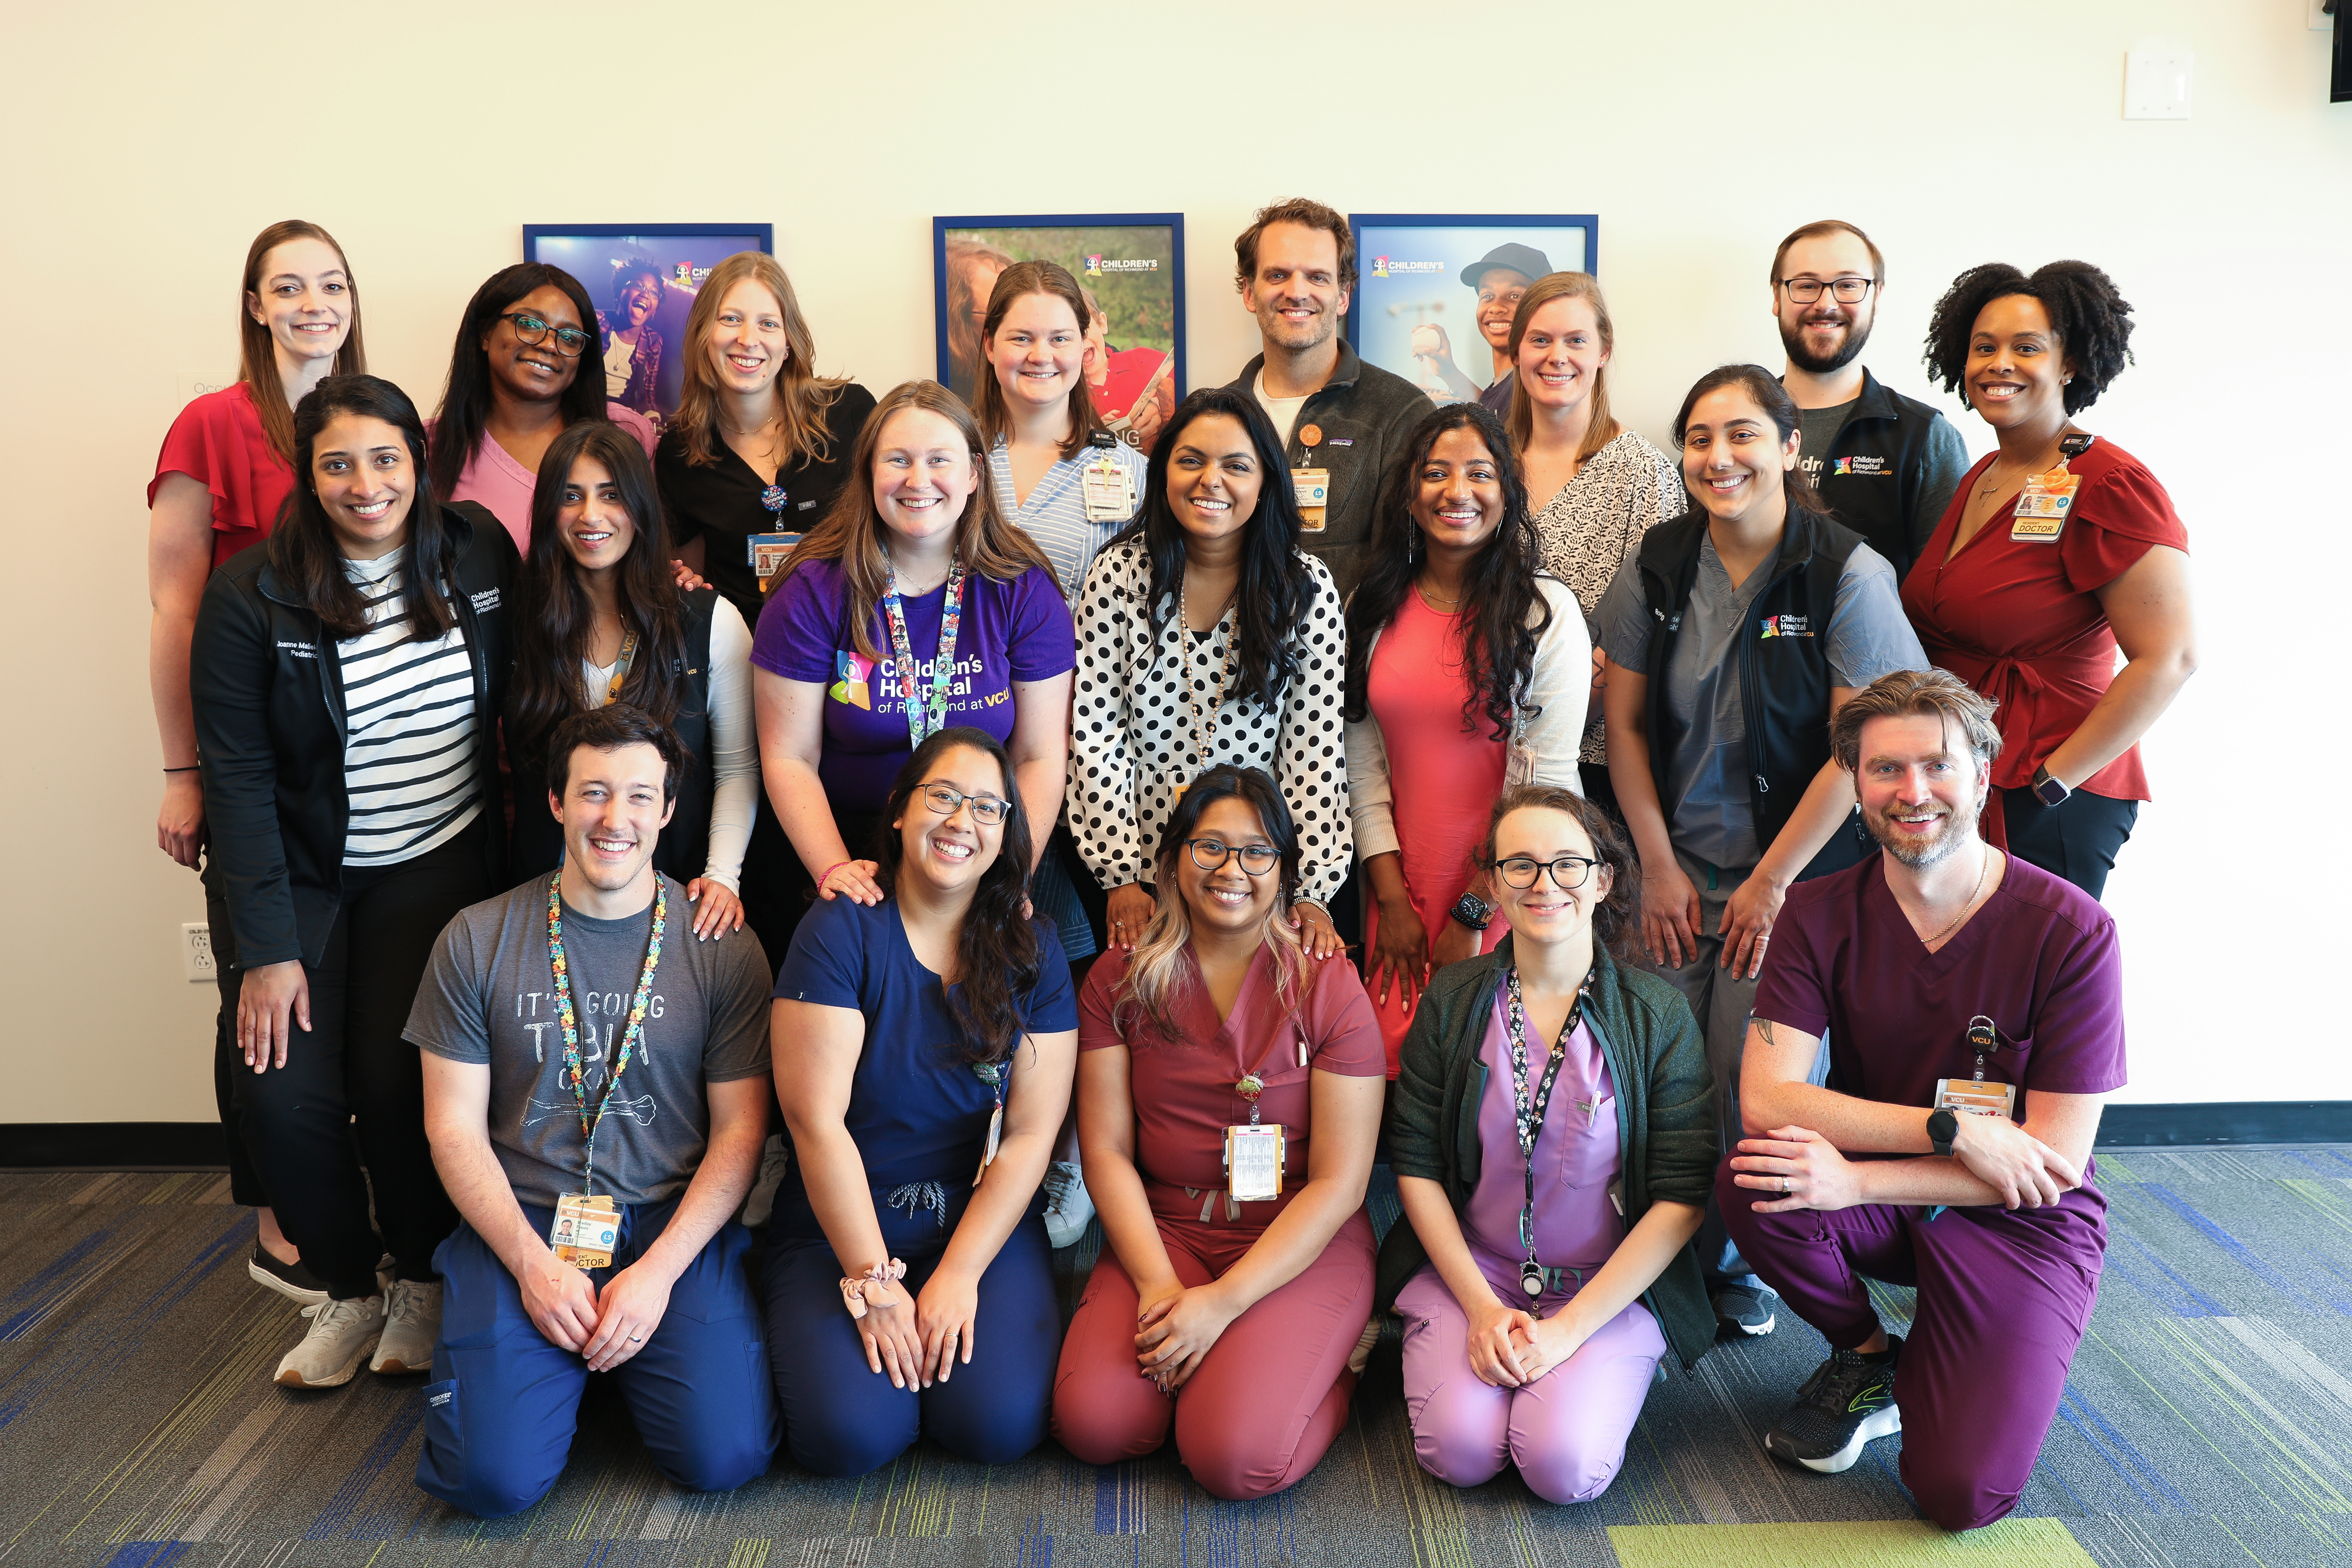 Pediatric residents at the School of Medicine follow a tandem schedule switching between inpatient and outpatient rotations. (Photo by Arda Athman, School of Medicine)